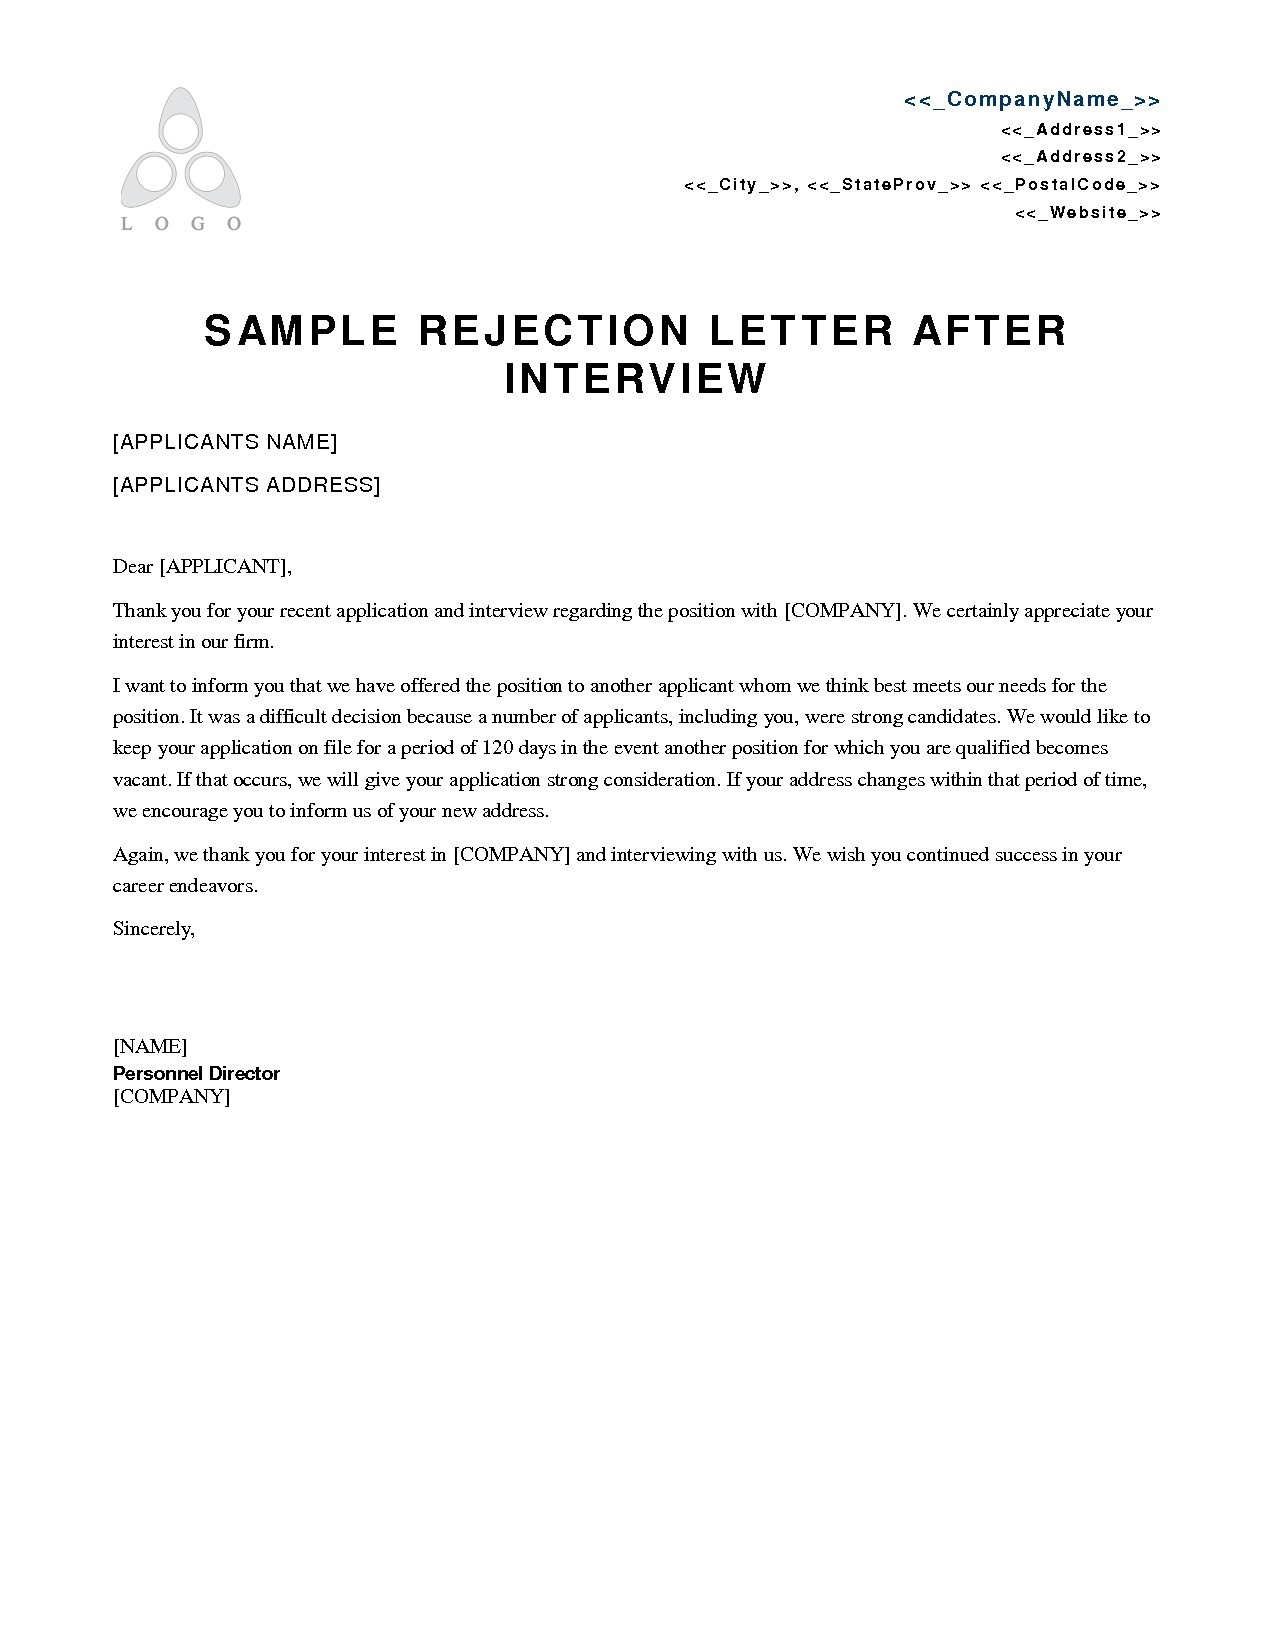 Example Rejection Letter After Interview